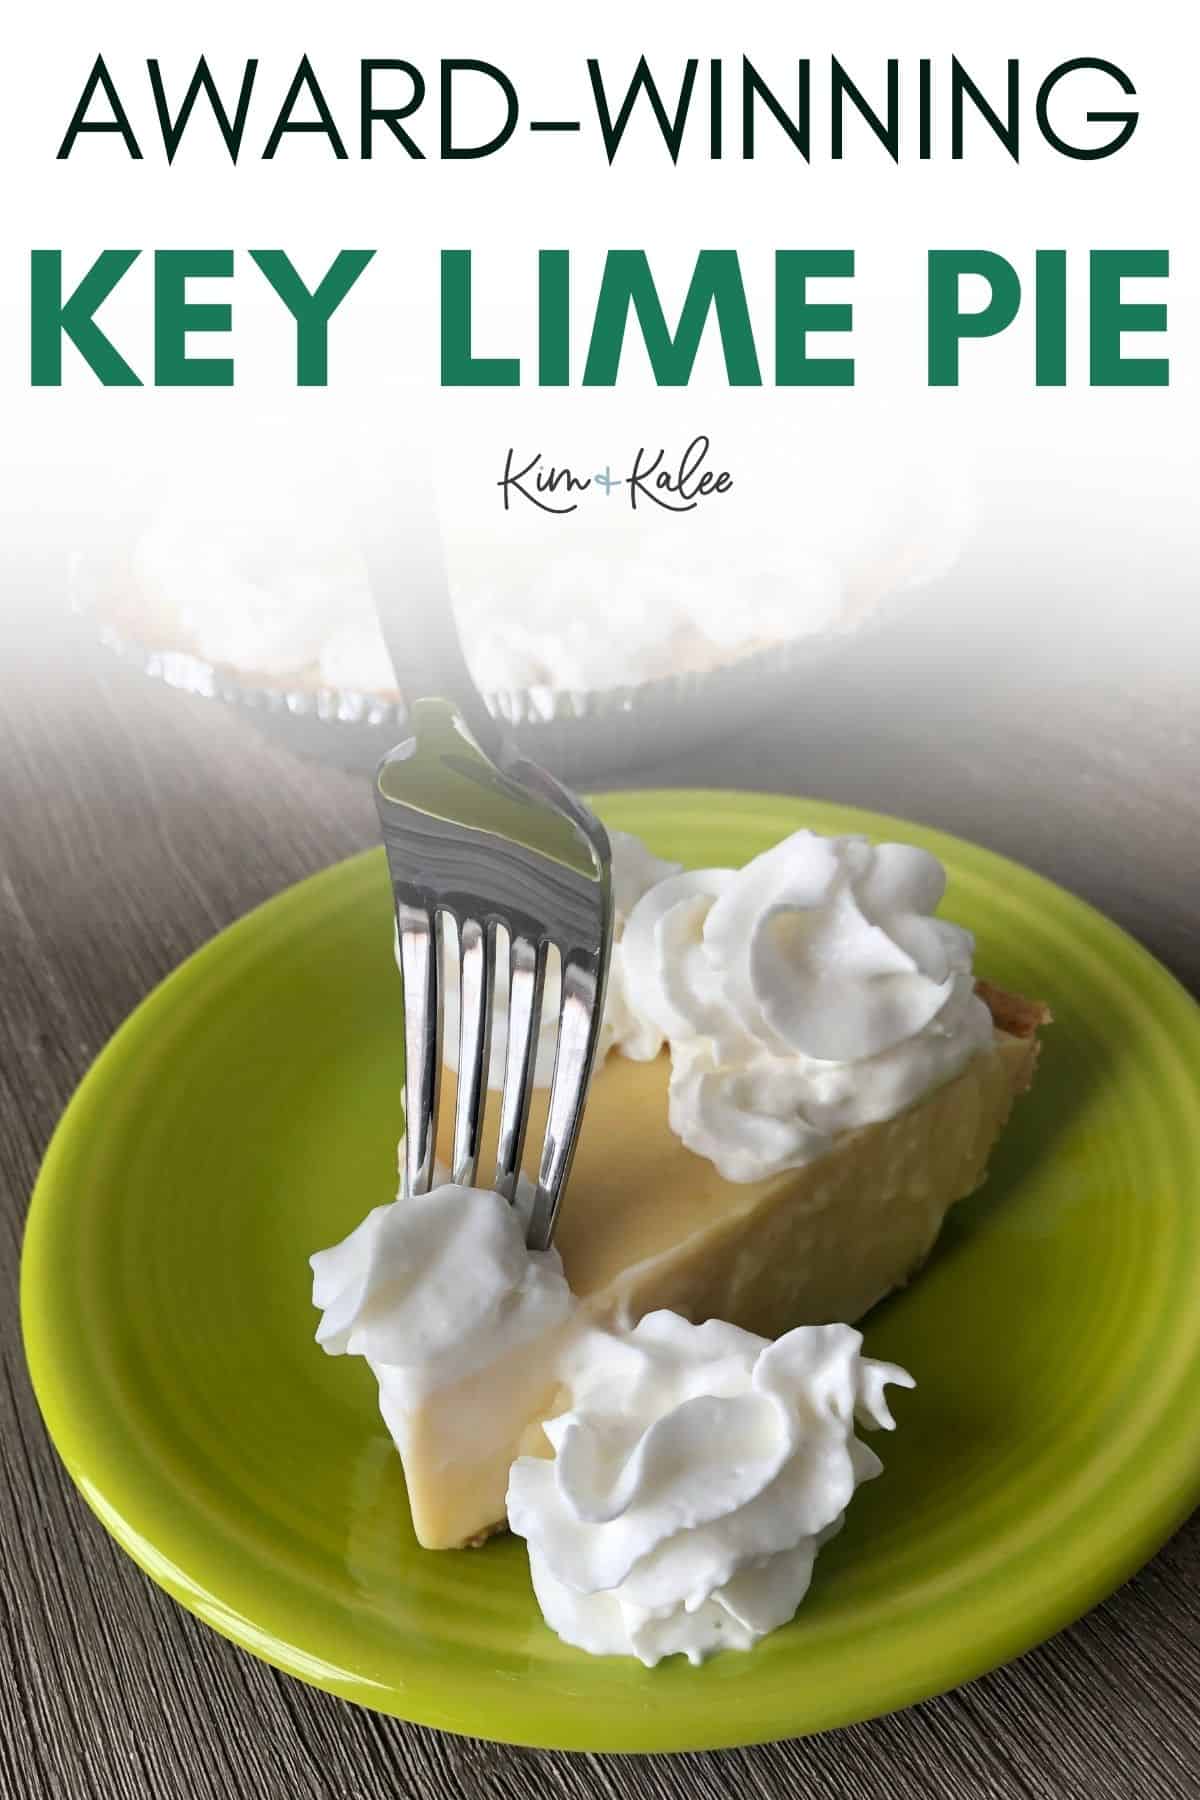 slice of key lime pie with a fork going in - text overlay "award winning key lime pie"